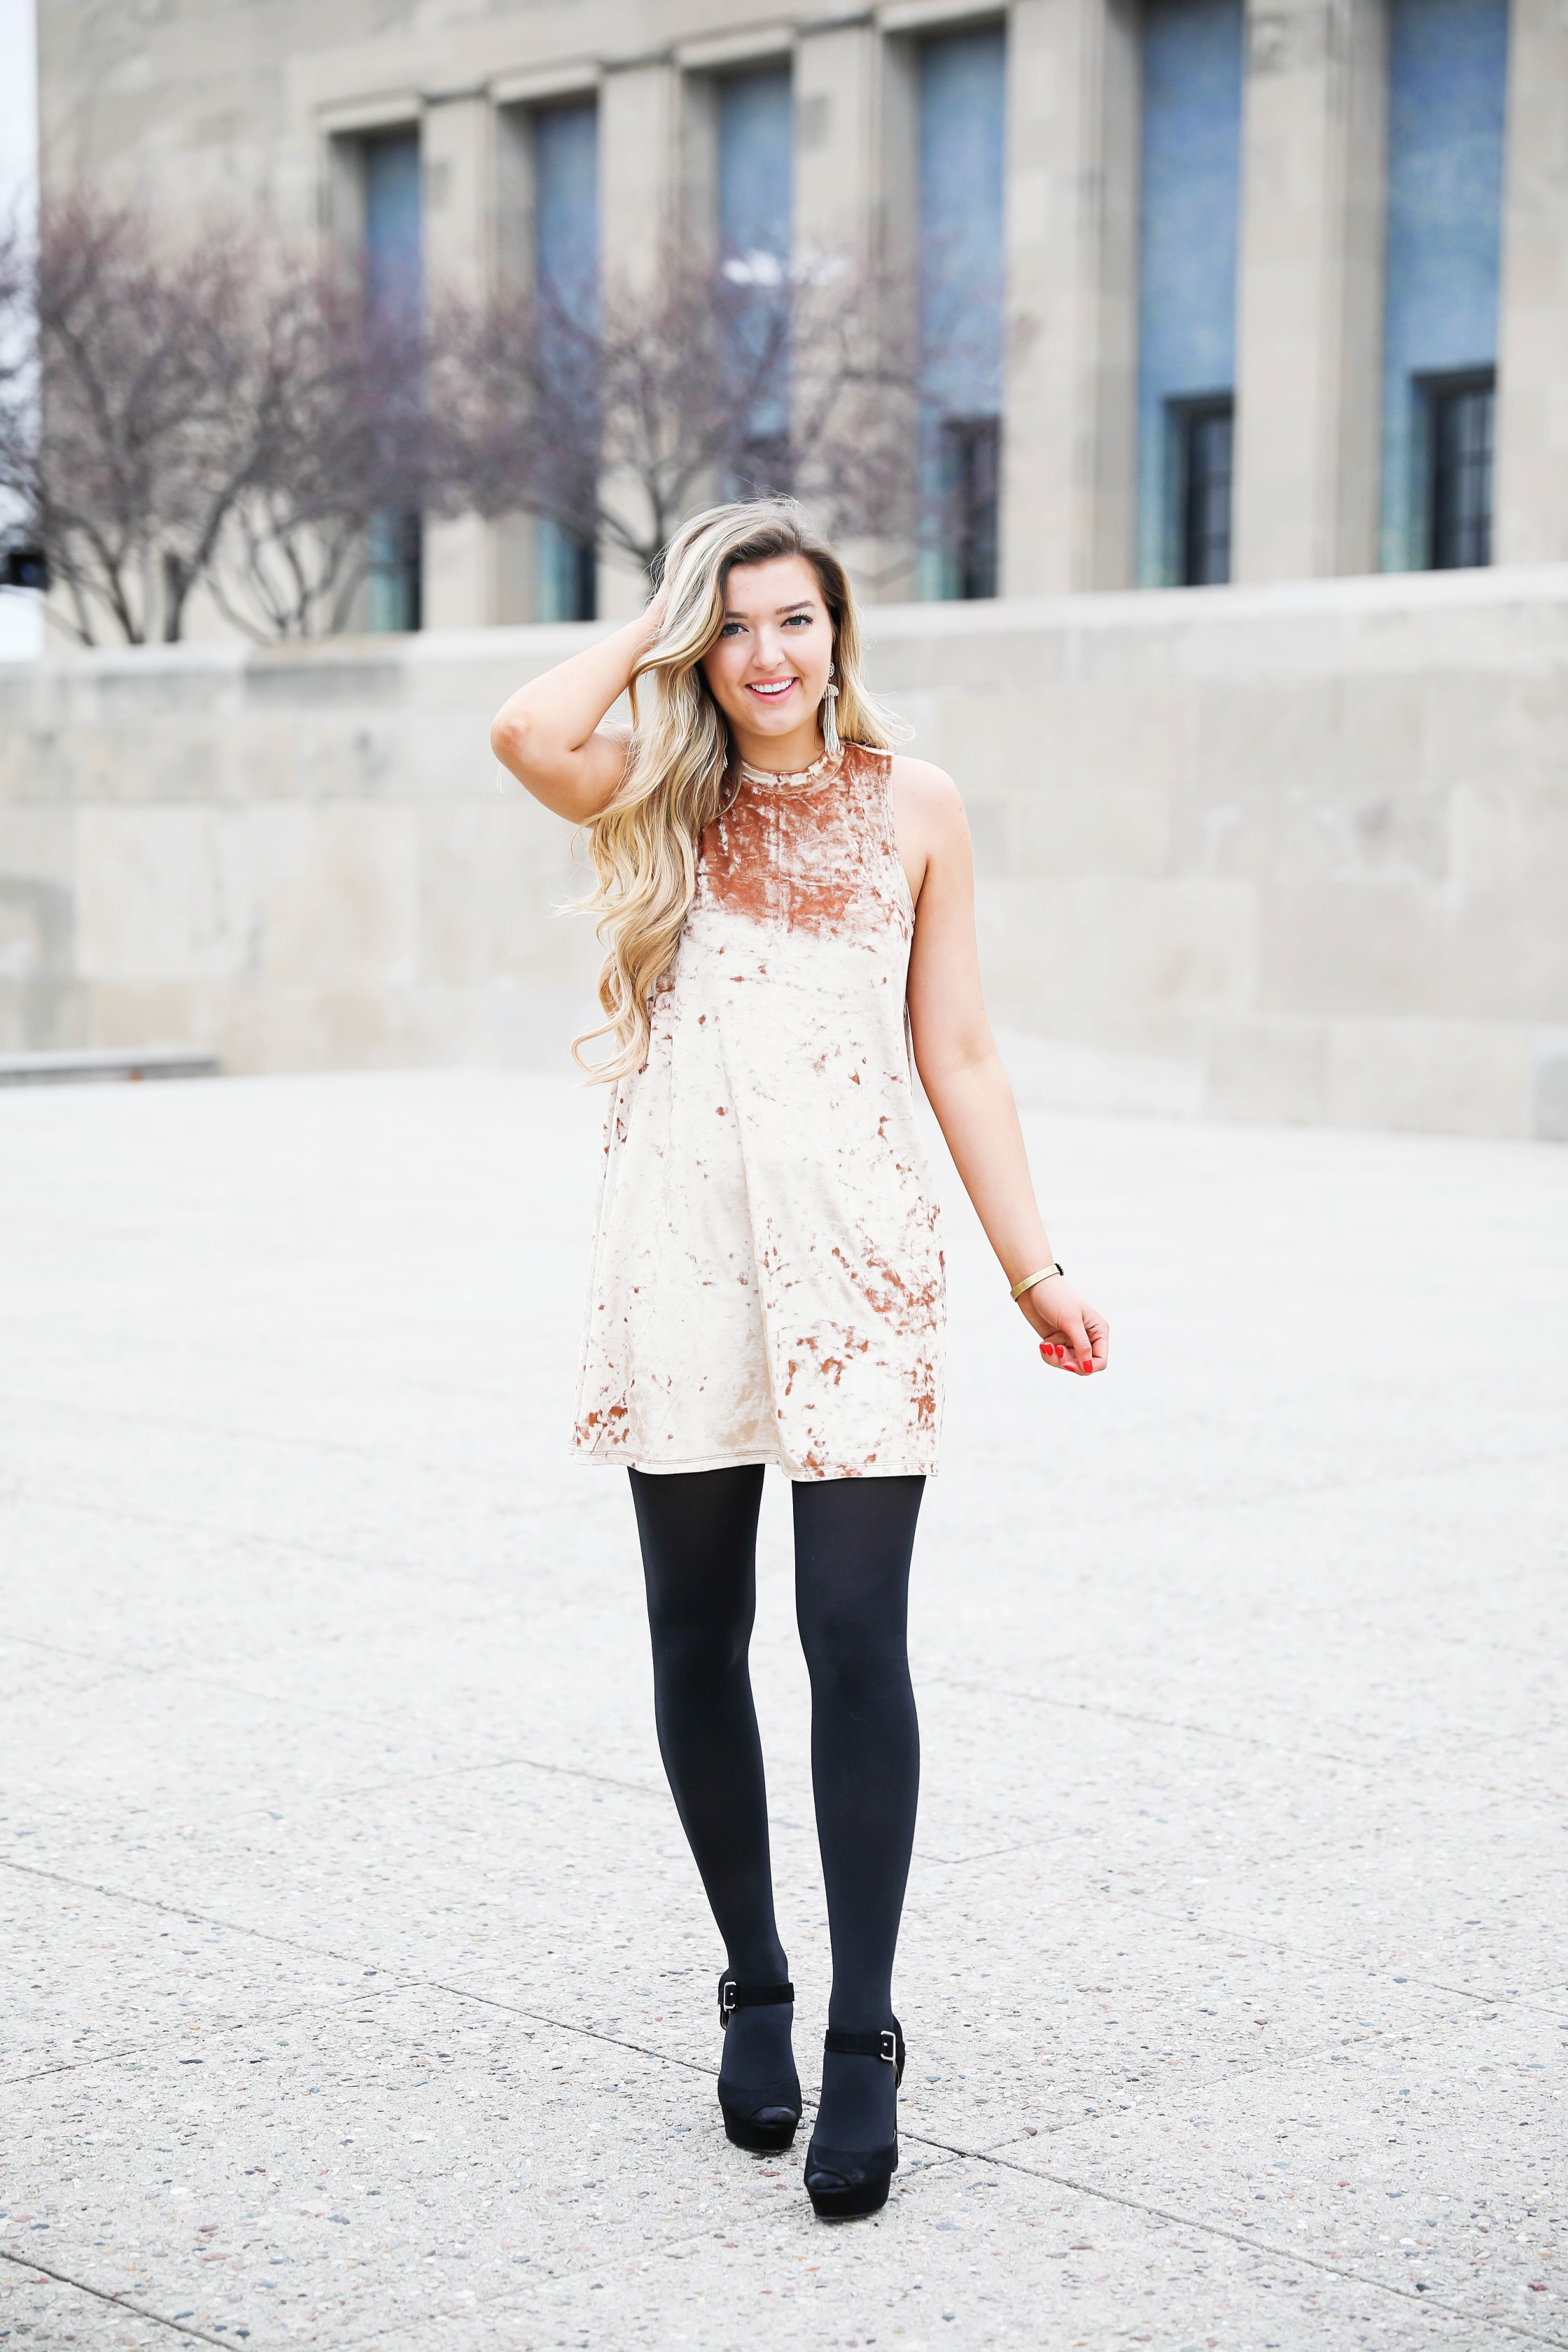 Velvet dress wtih black tights and black heels! The cutest new years eve outfit! Classy nye look! This dress holiday outfit is on the blog daily dose of charm by lauren lindmark! Click for details!